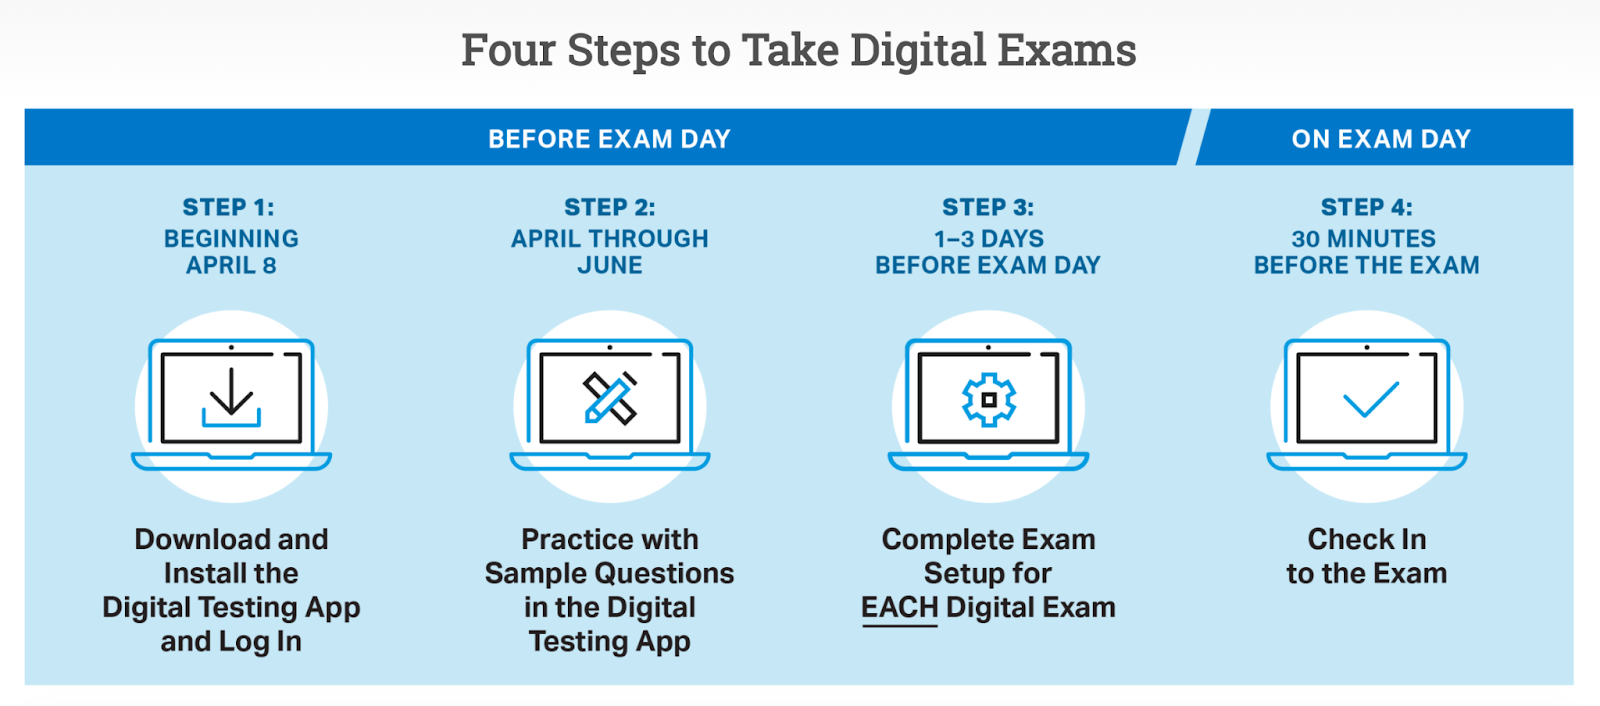 “Four Steps to Take Digital Exams” (collegeboard.org)